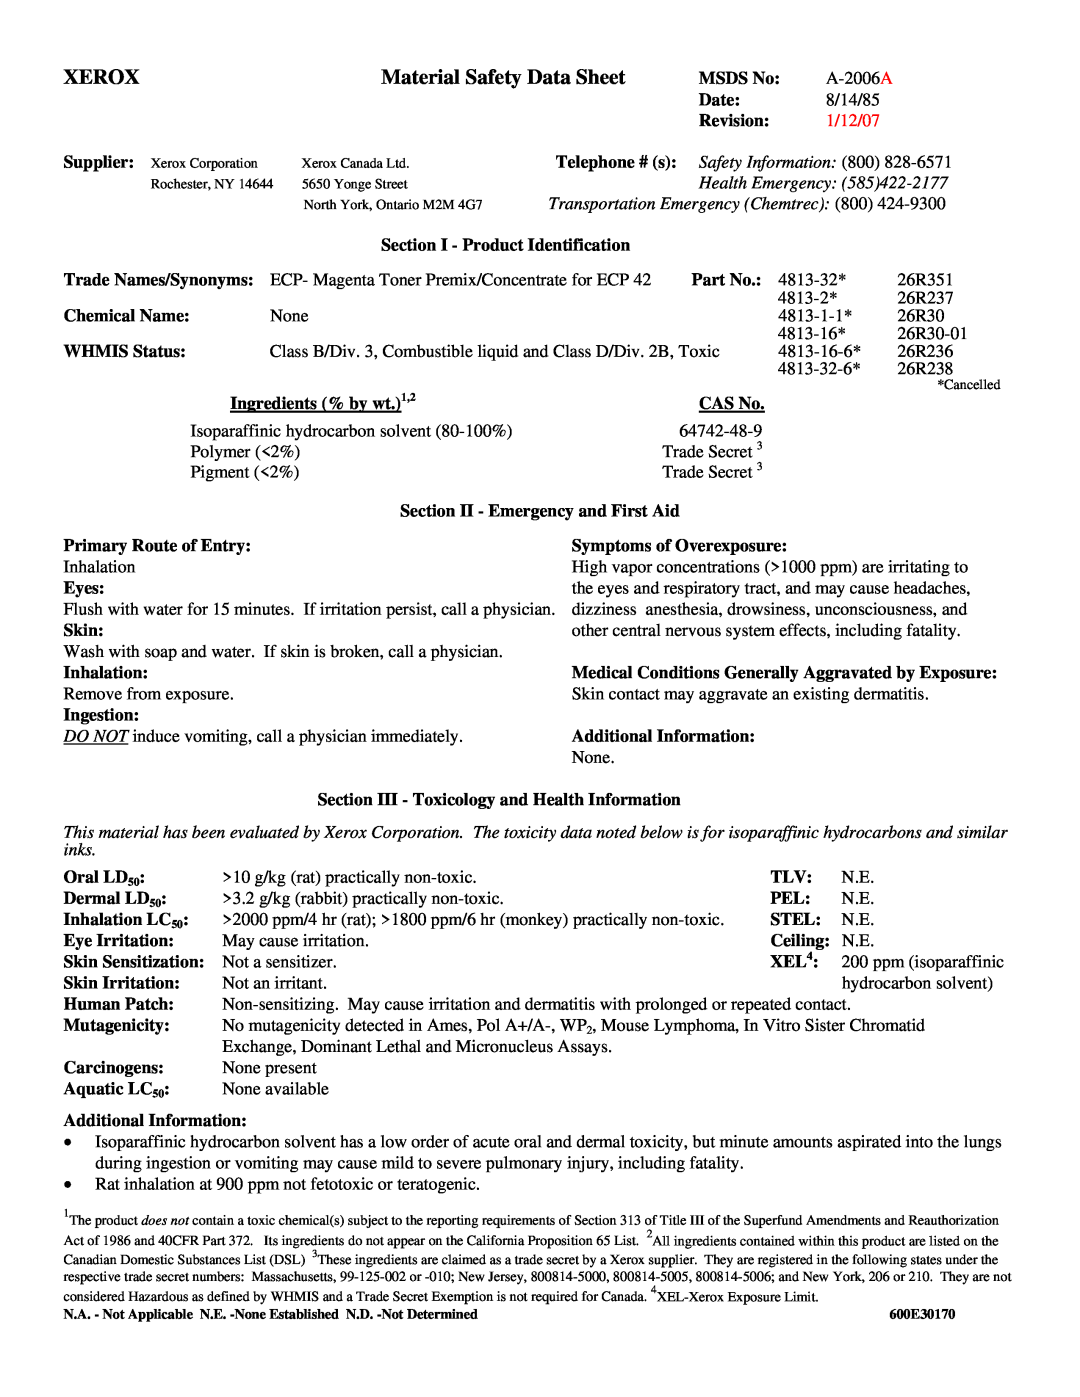 Xerox 518 manual Xerox, Material Safety Data Sheet, 1/12/07, Telephone # s Safety Information 800 Health Emergency 